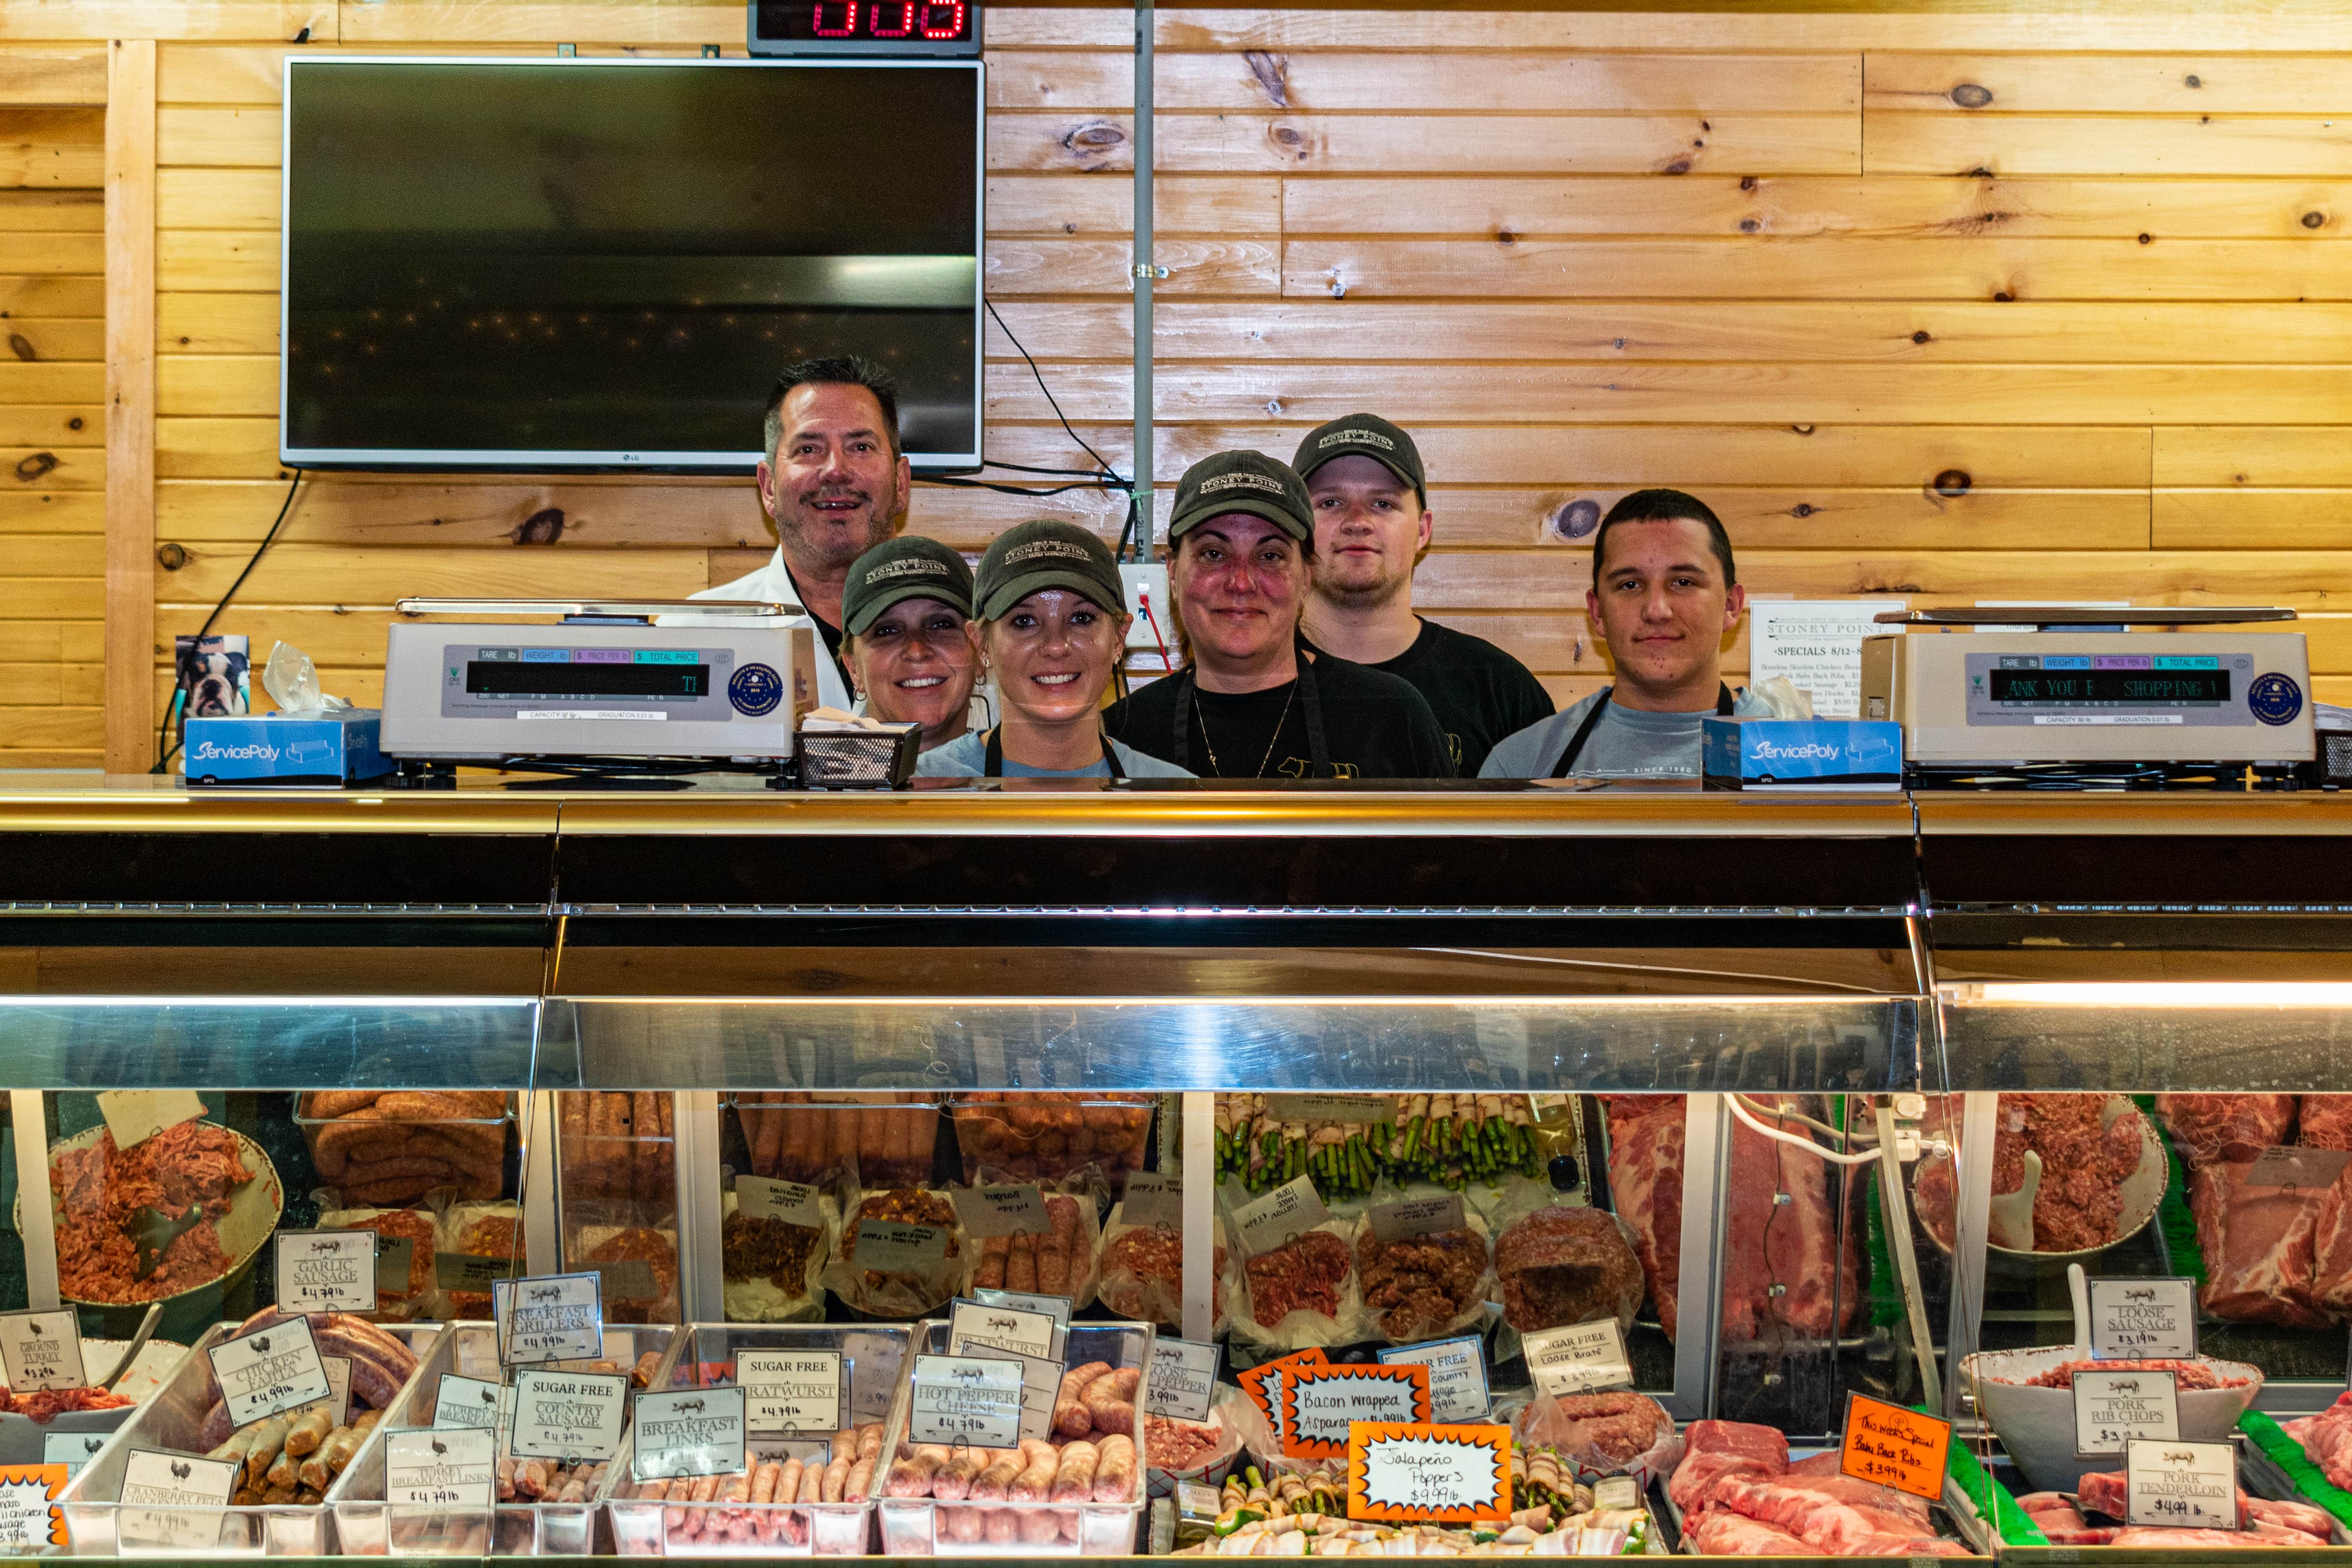 Stoney Point Farm Market, a merchant at The Markets at Hanover provides quality meat to the community.